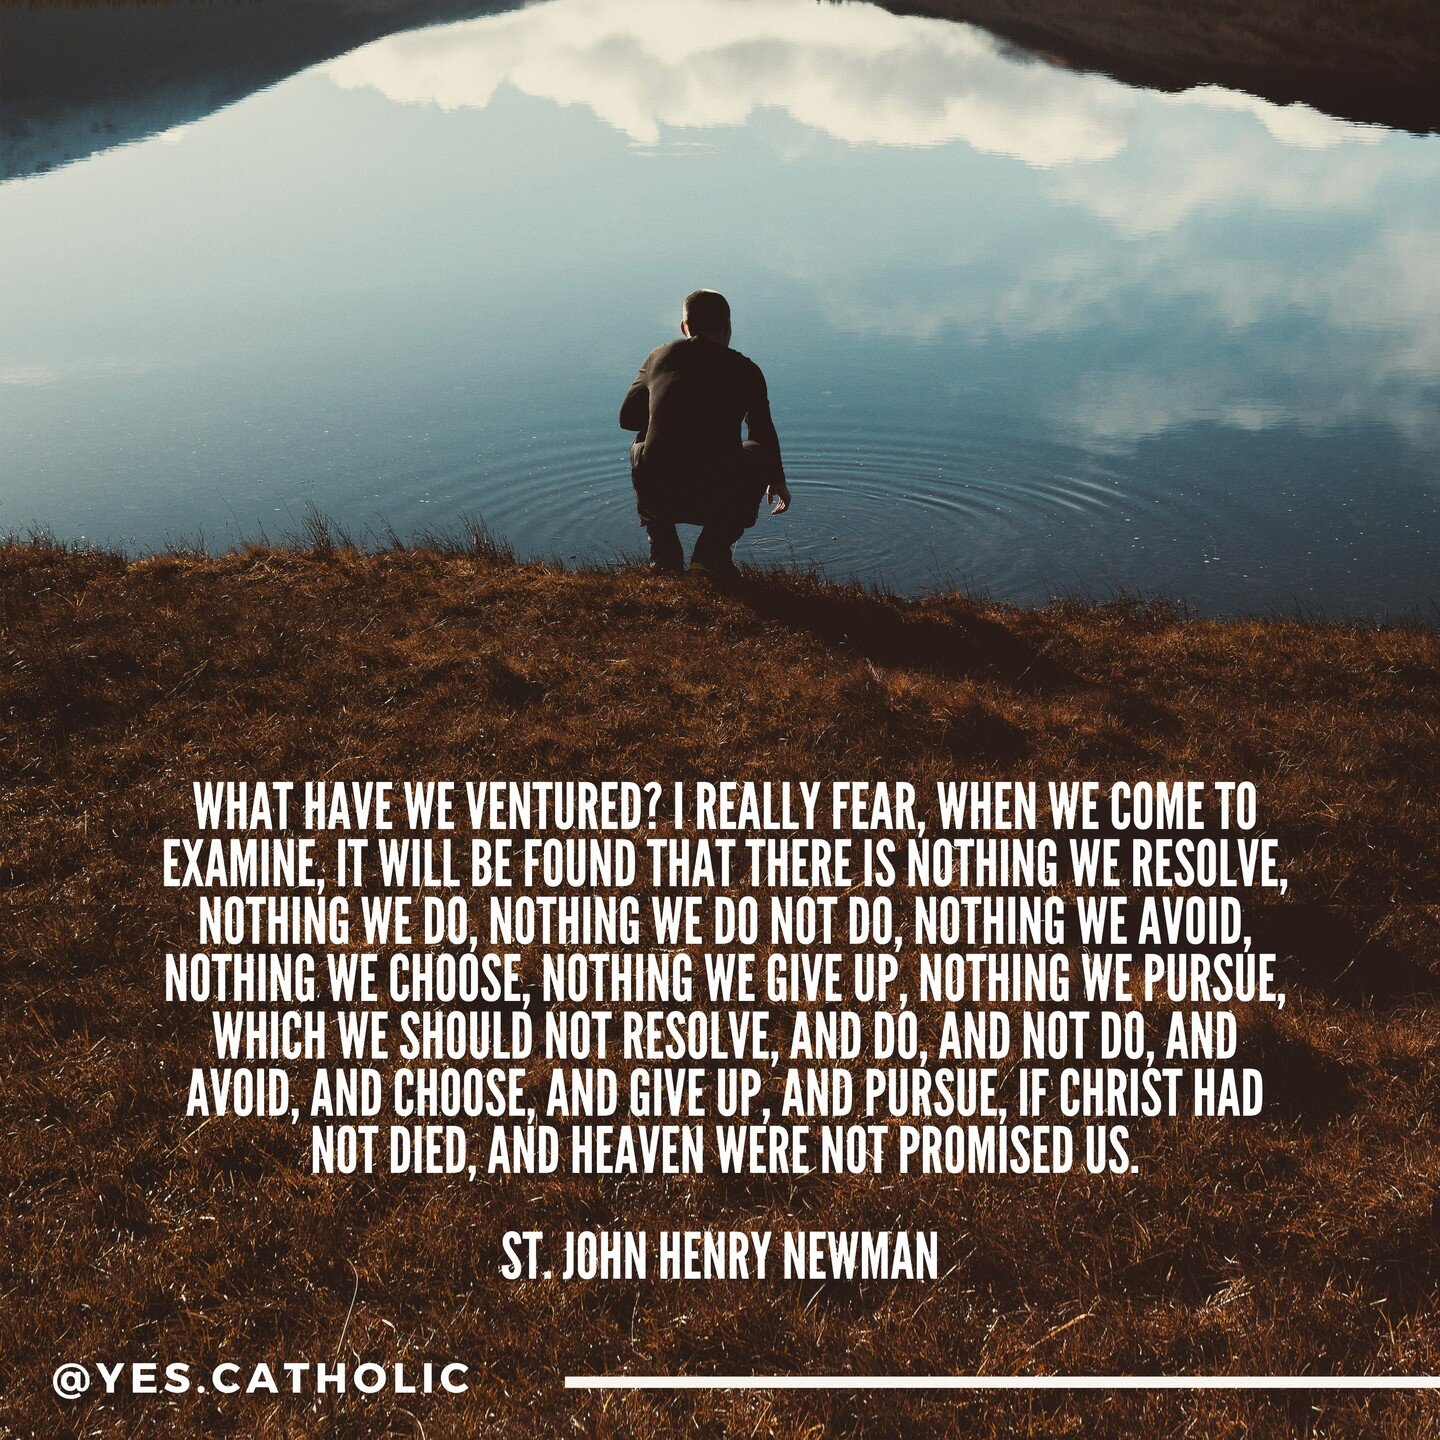 St. John Henry Newman is my favorite saint. In this powerful sermon, he defines faith as venturing on Christ's word without seeing. The apostles risked everything for the sake of the name, and Newman considers if we are really risking anything anymor